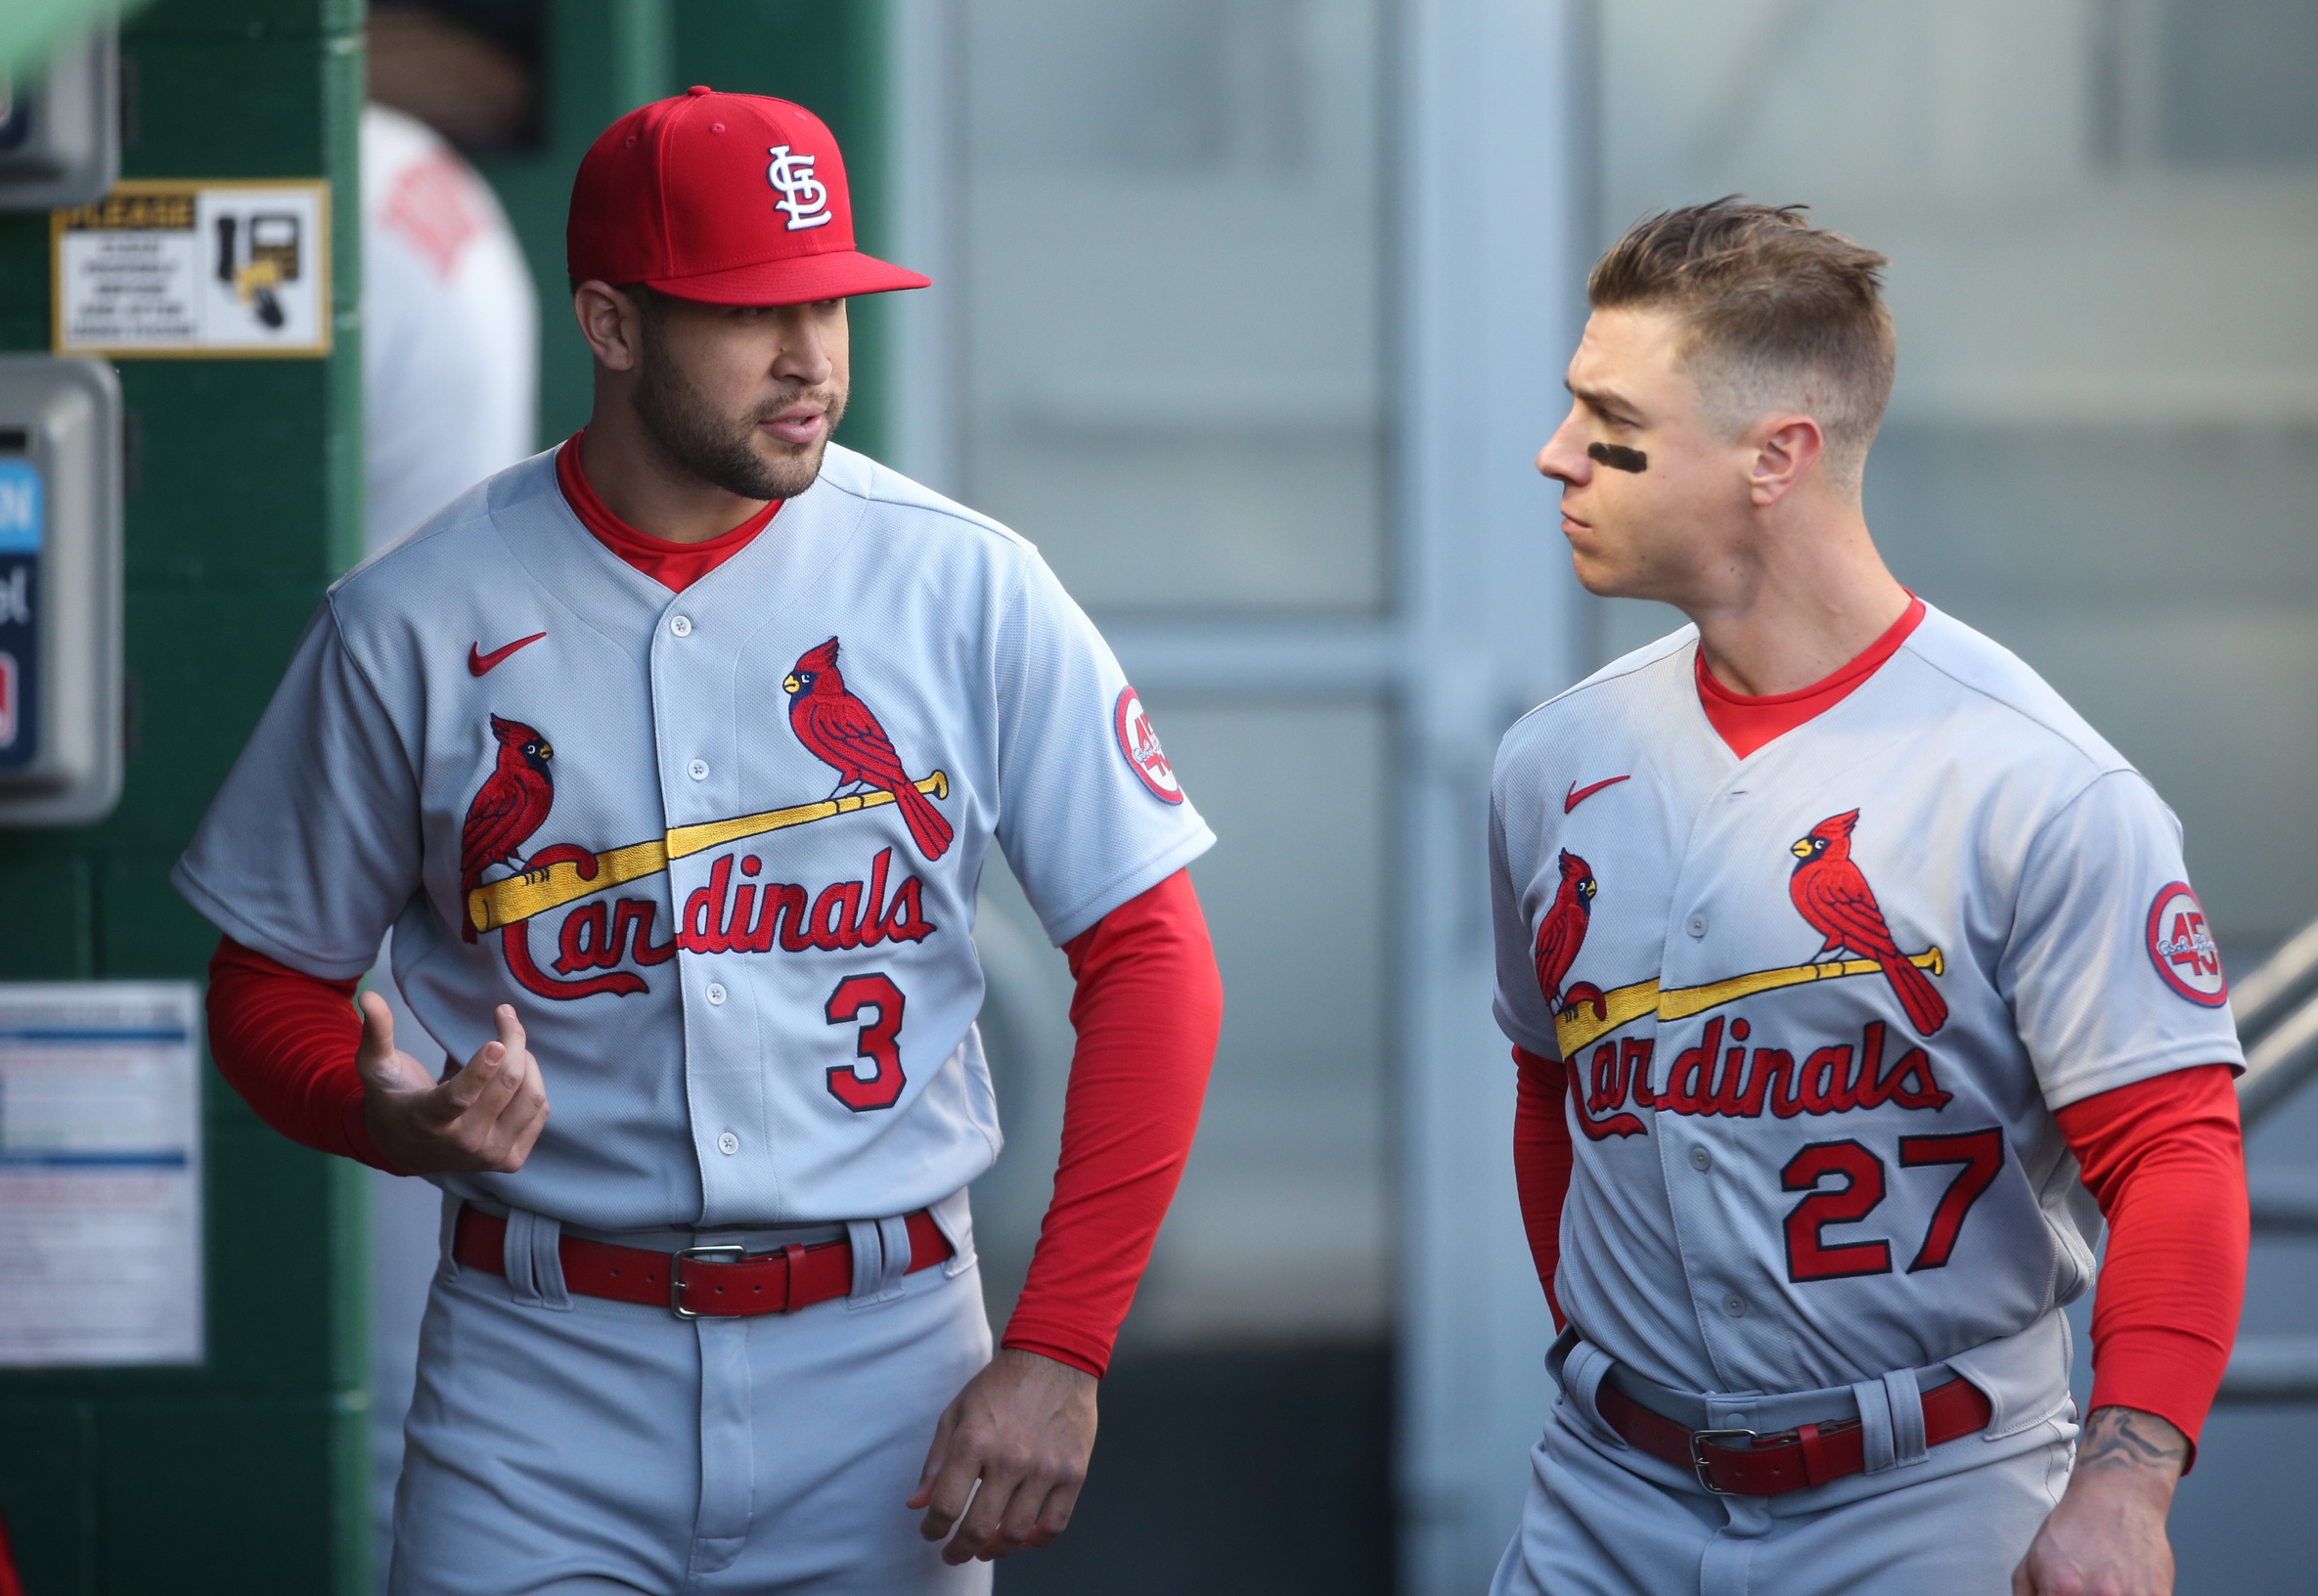 Bernie On The Cardinals: For Now, the Front Office Is Smart to Stay the  Course With the Current Outfield. - Scoops